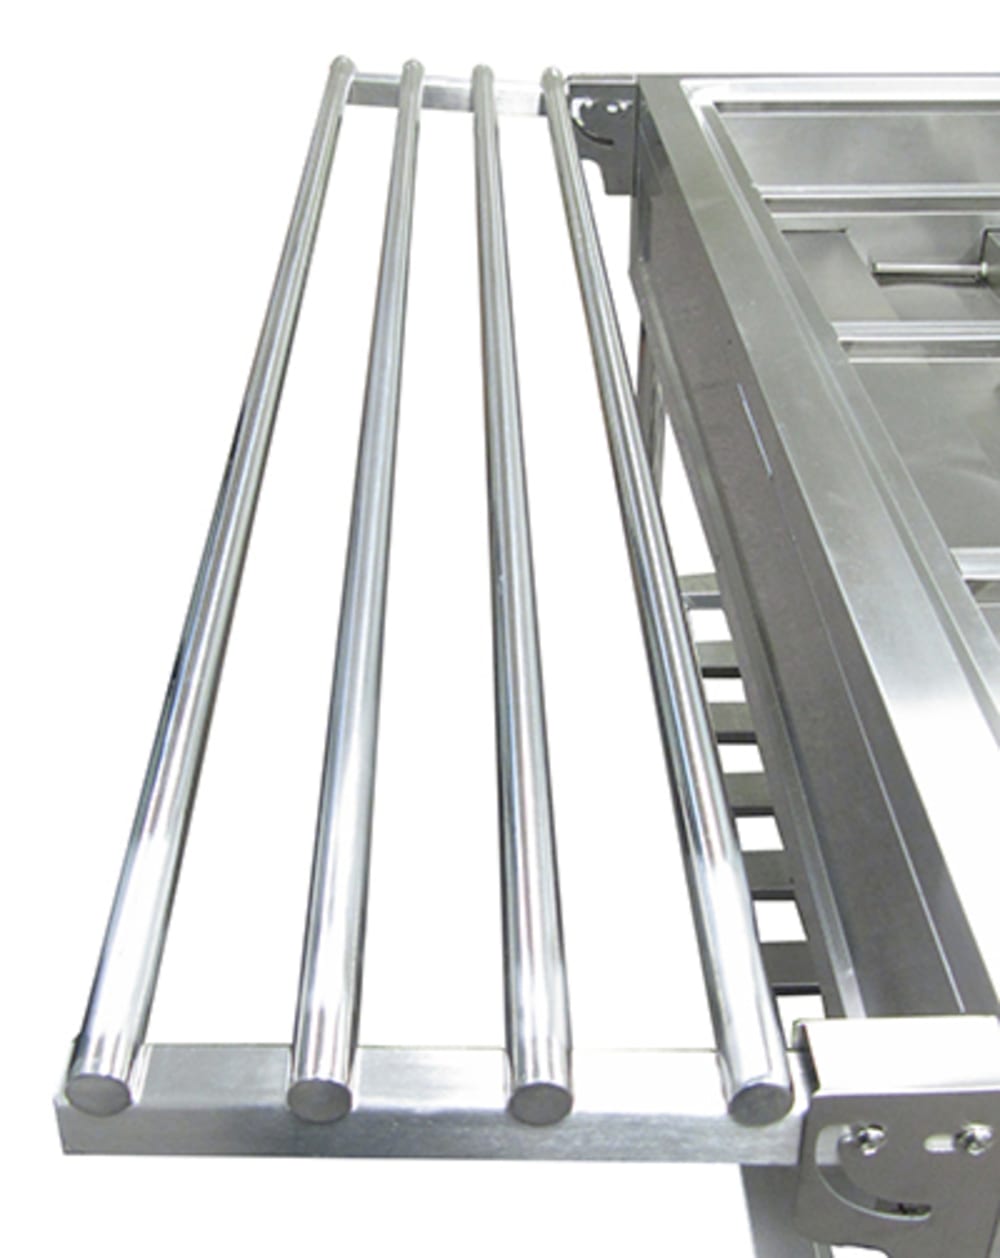 Adcraft EST-240/TH Stainless Steel Tray Holder - (EST-240)